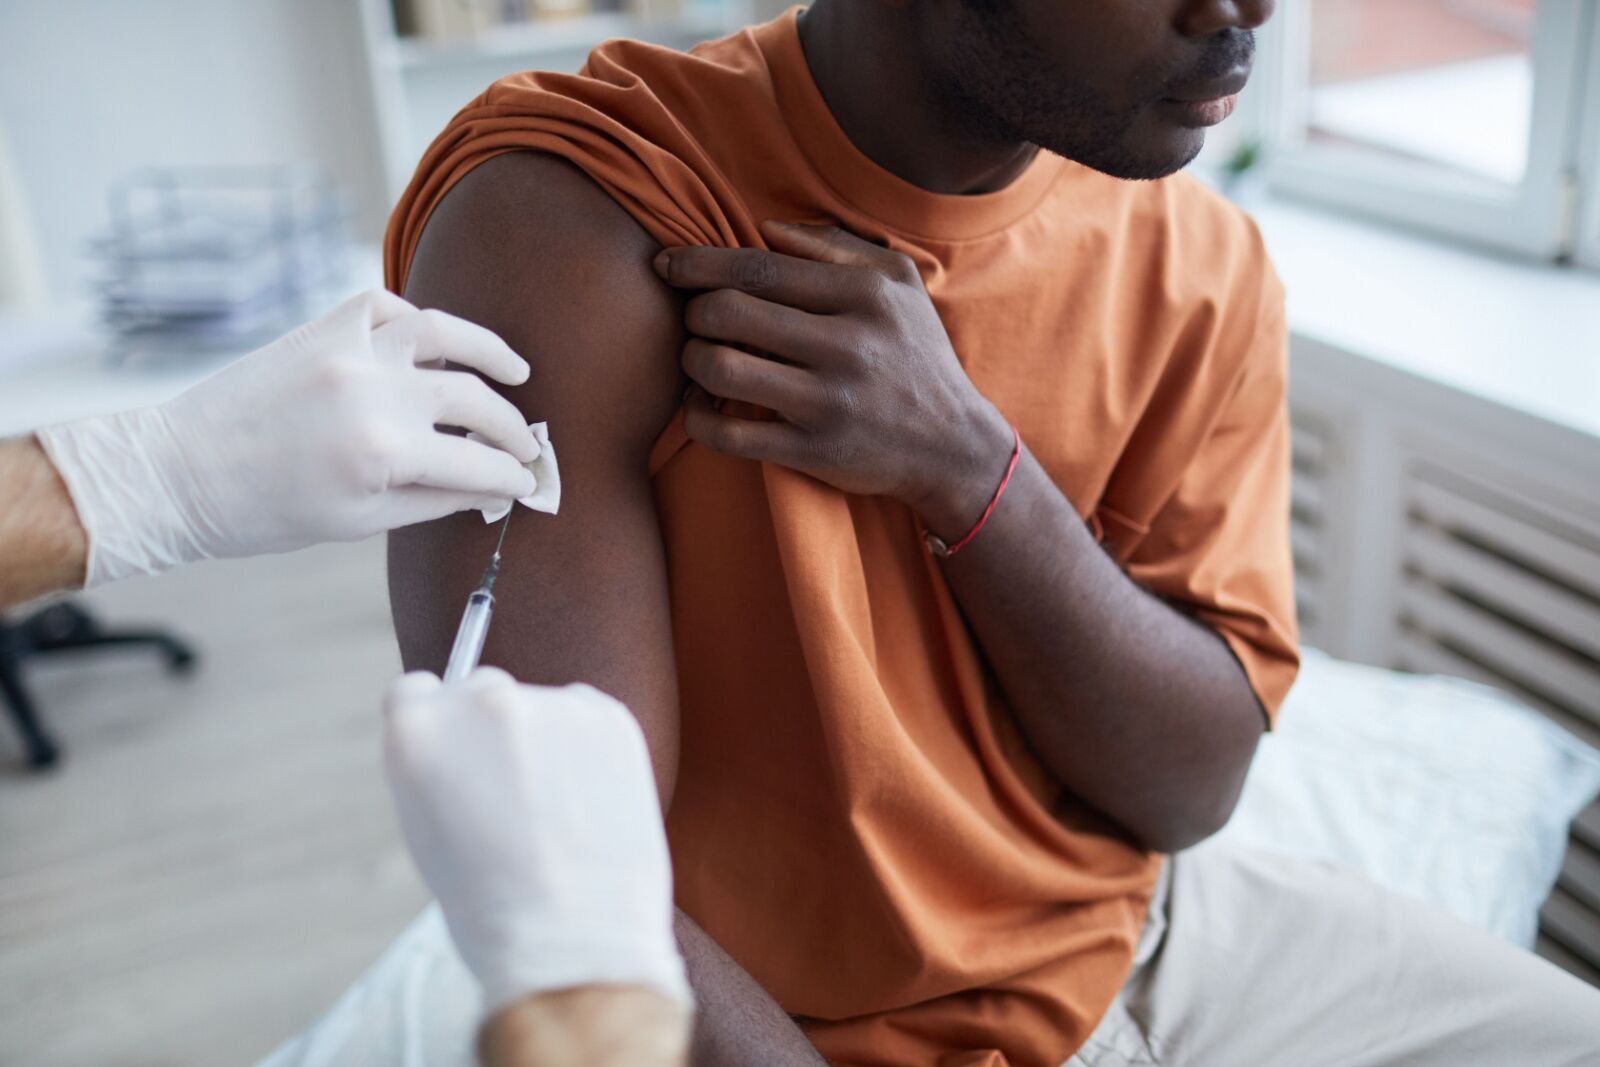 person getting a travel vaccine - health emergency abroad 